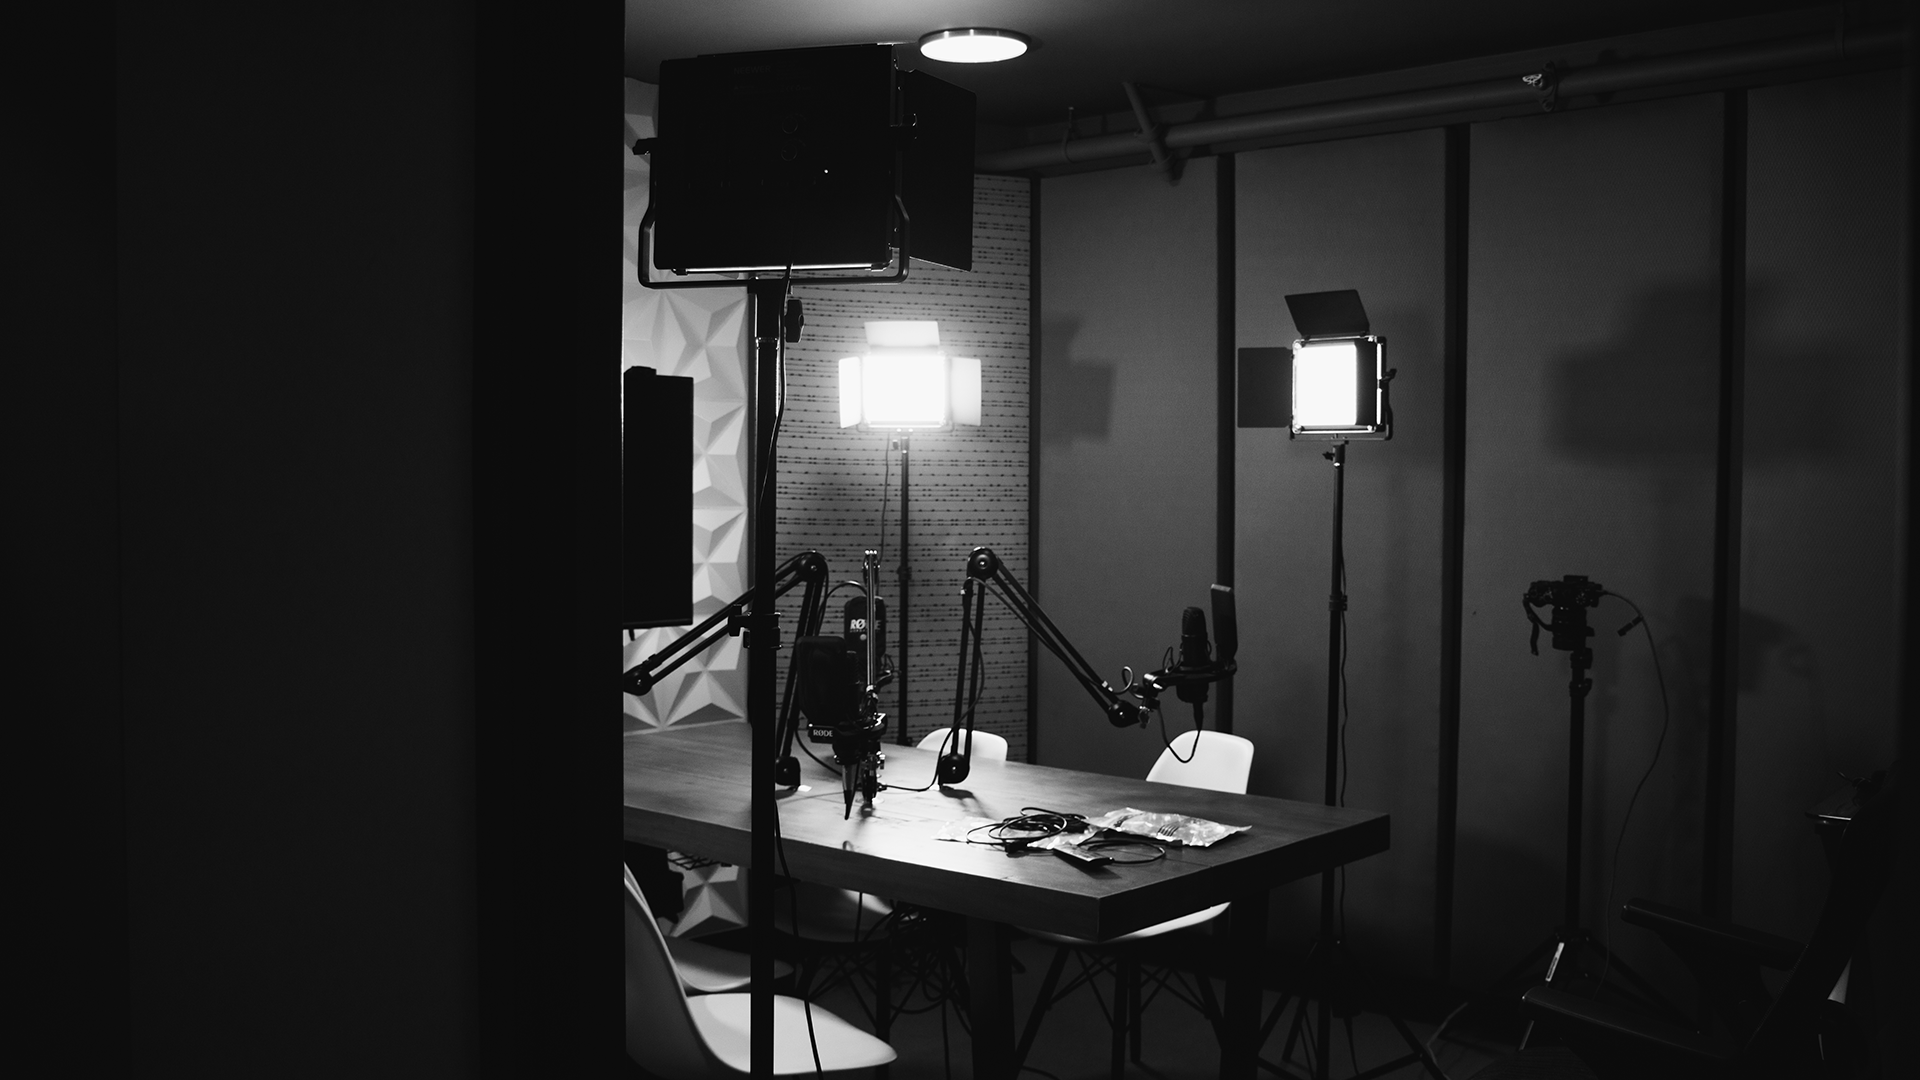 lighting set up at the Podcast Studio in The Film Hub